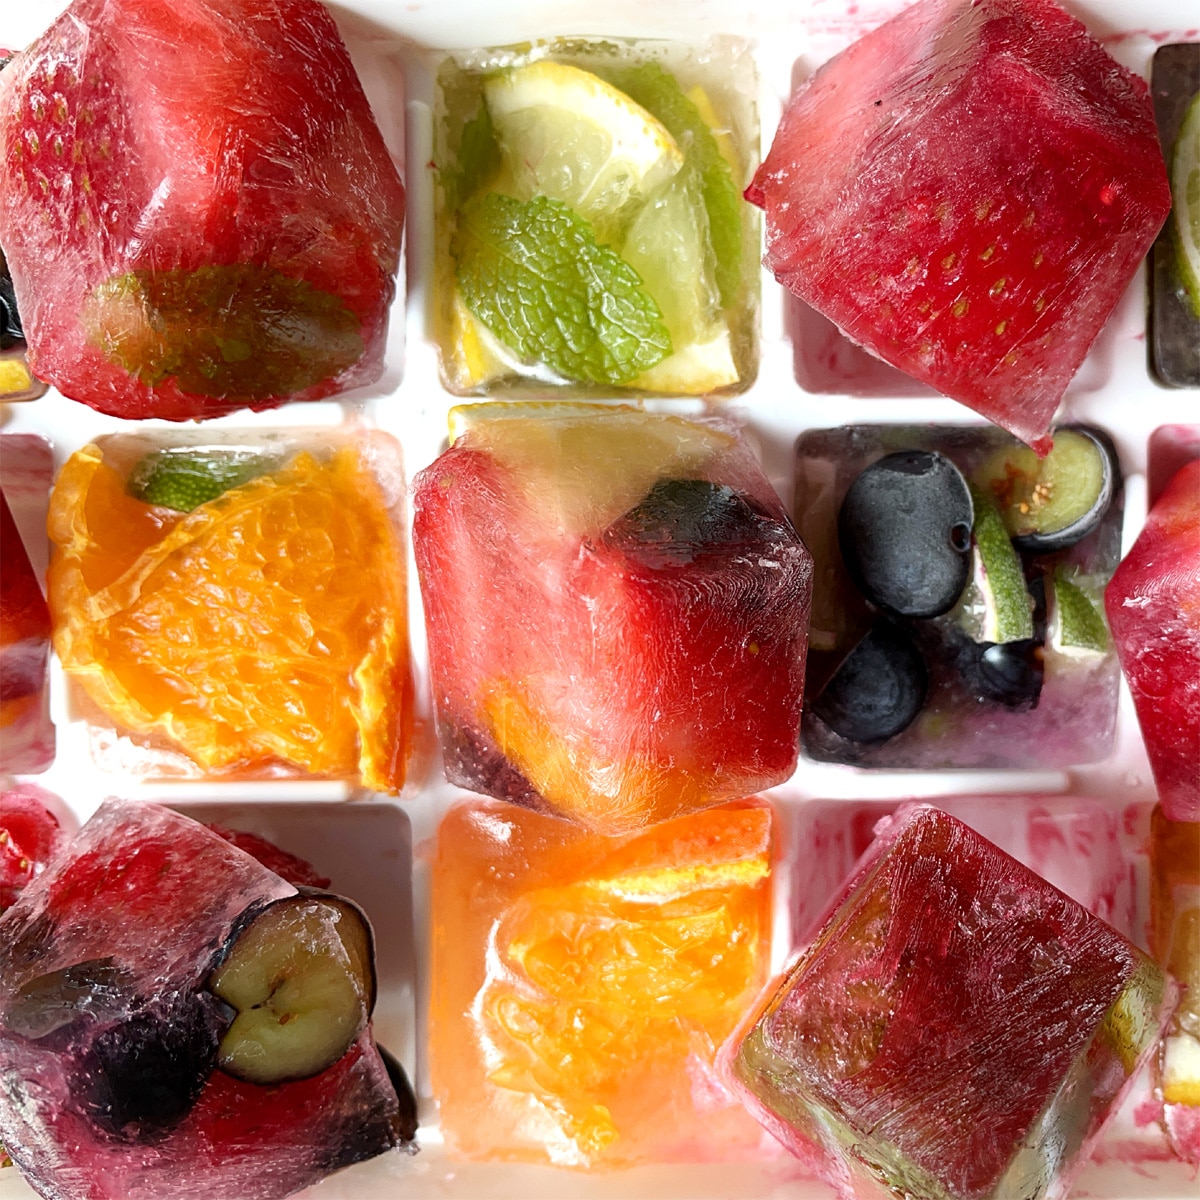 Fruit Ice Cubes - Spruce Up Any Drink! - Pip and Ebby